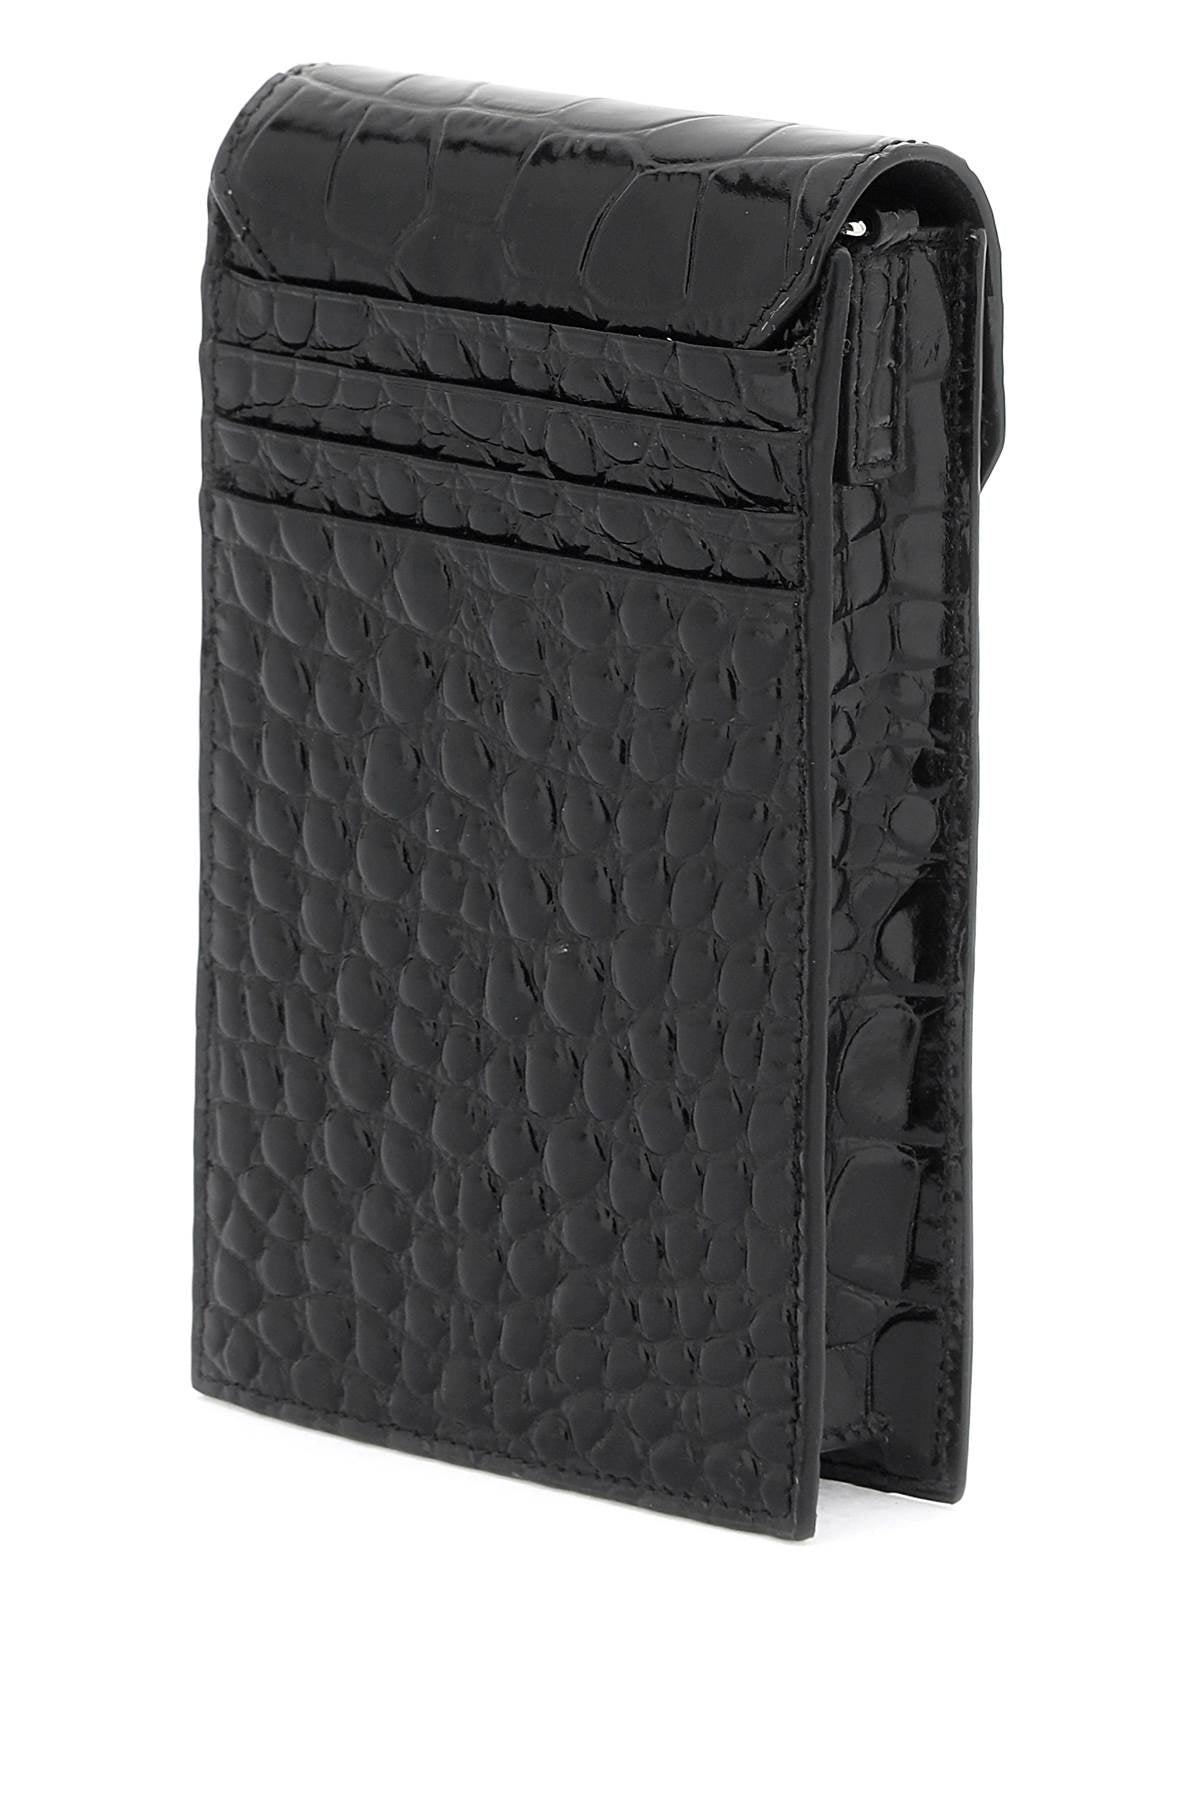 VIVIENNE WESTWOOD Luxury Phone Holder with Crocodile Embossing and Iconic Orb Detail